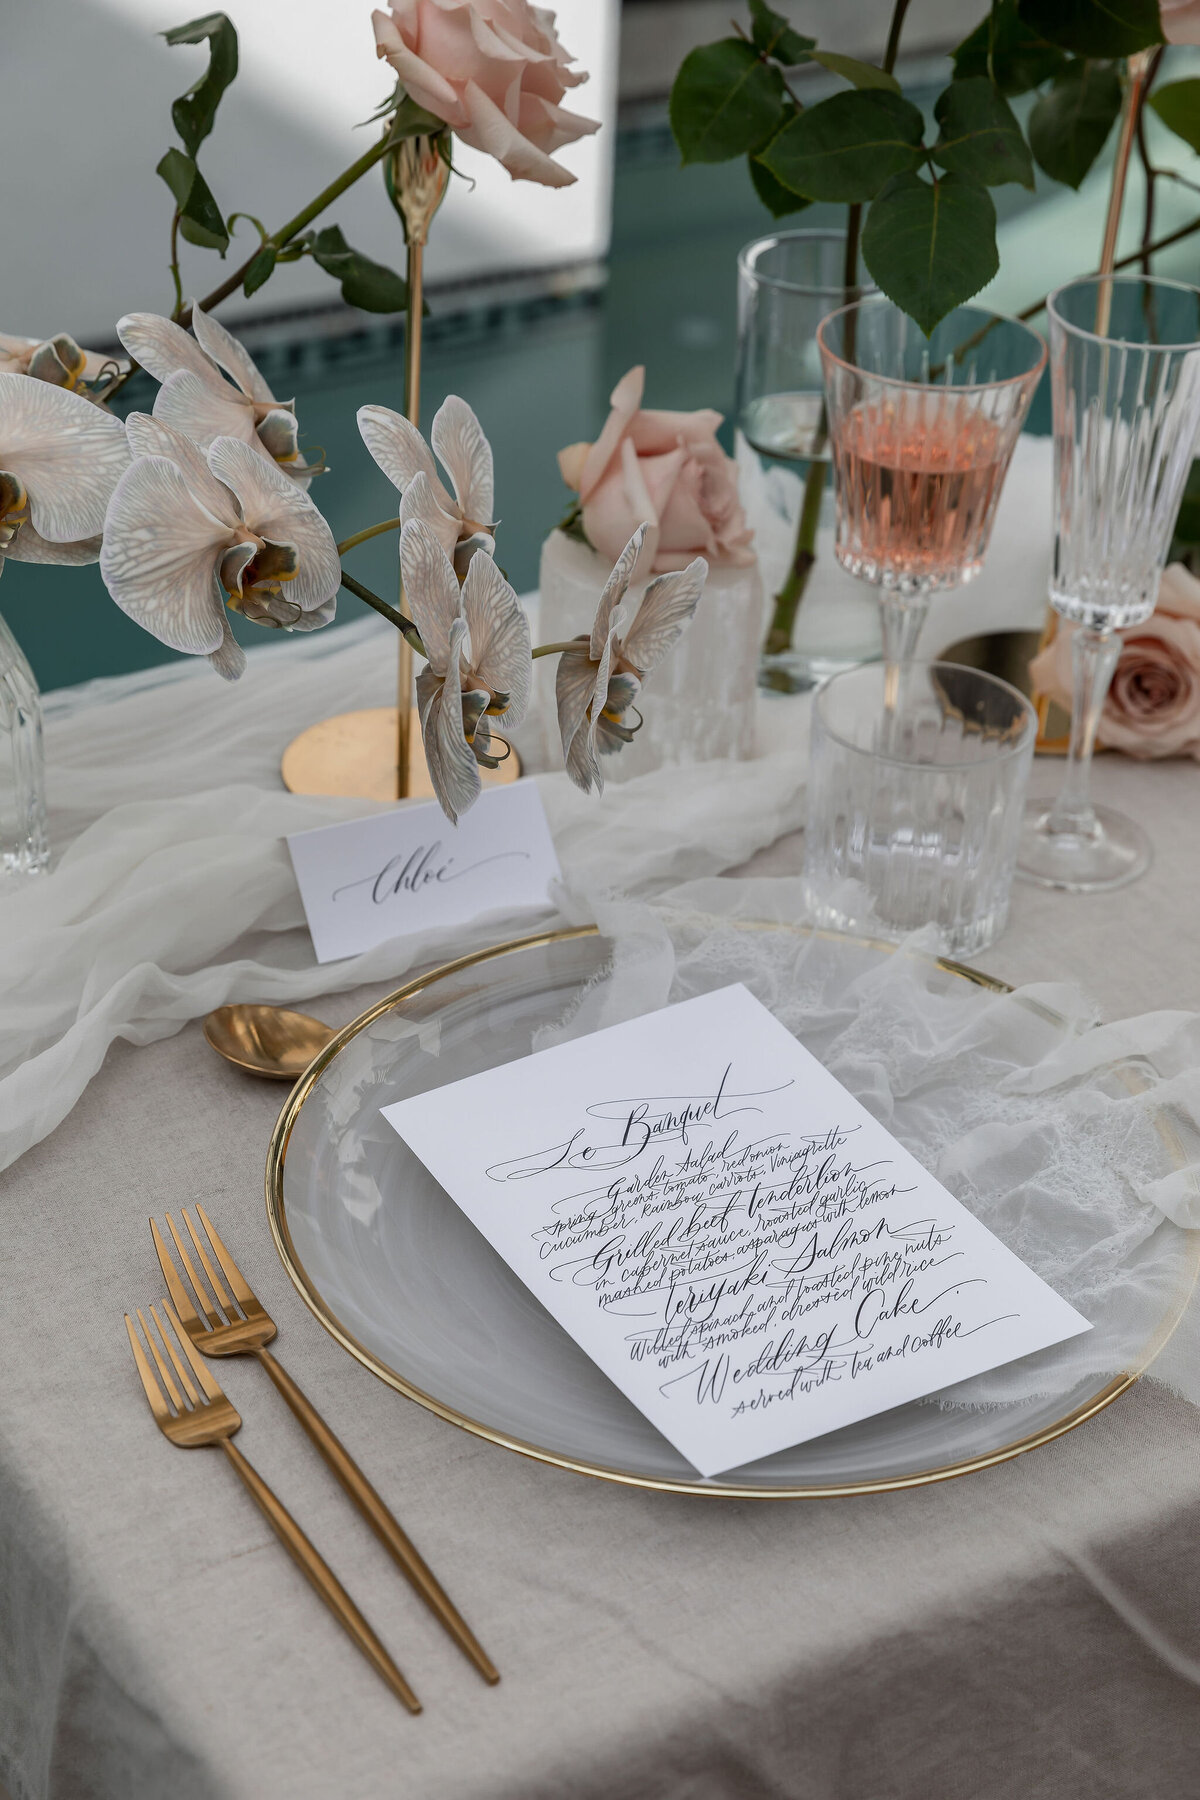 Wedding-table-trends-2020